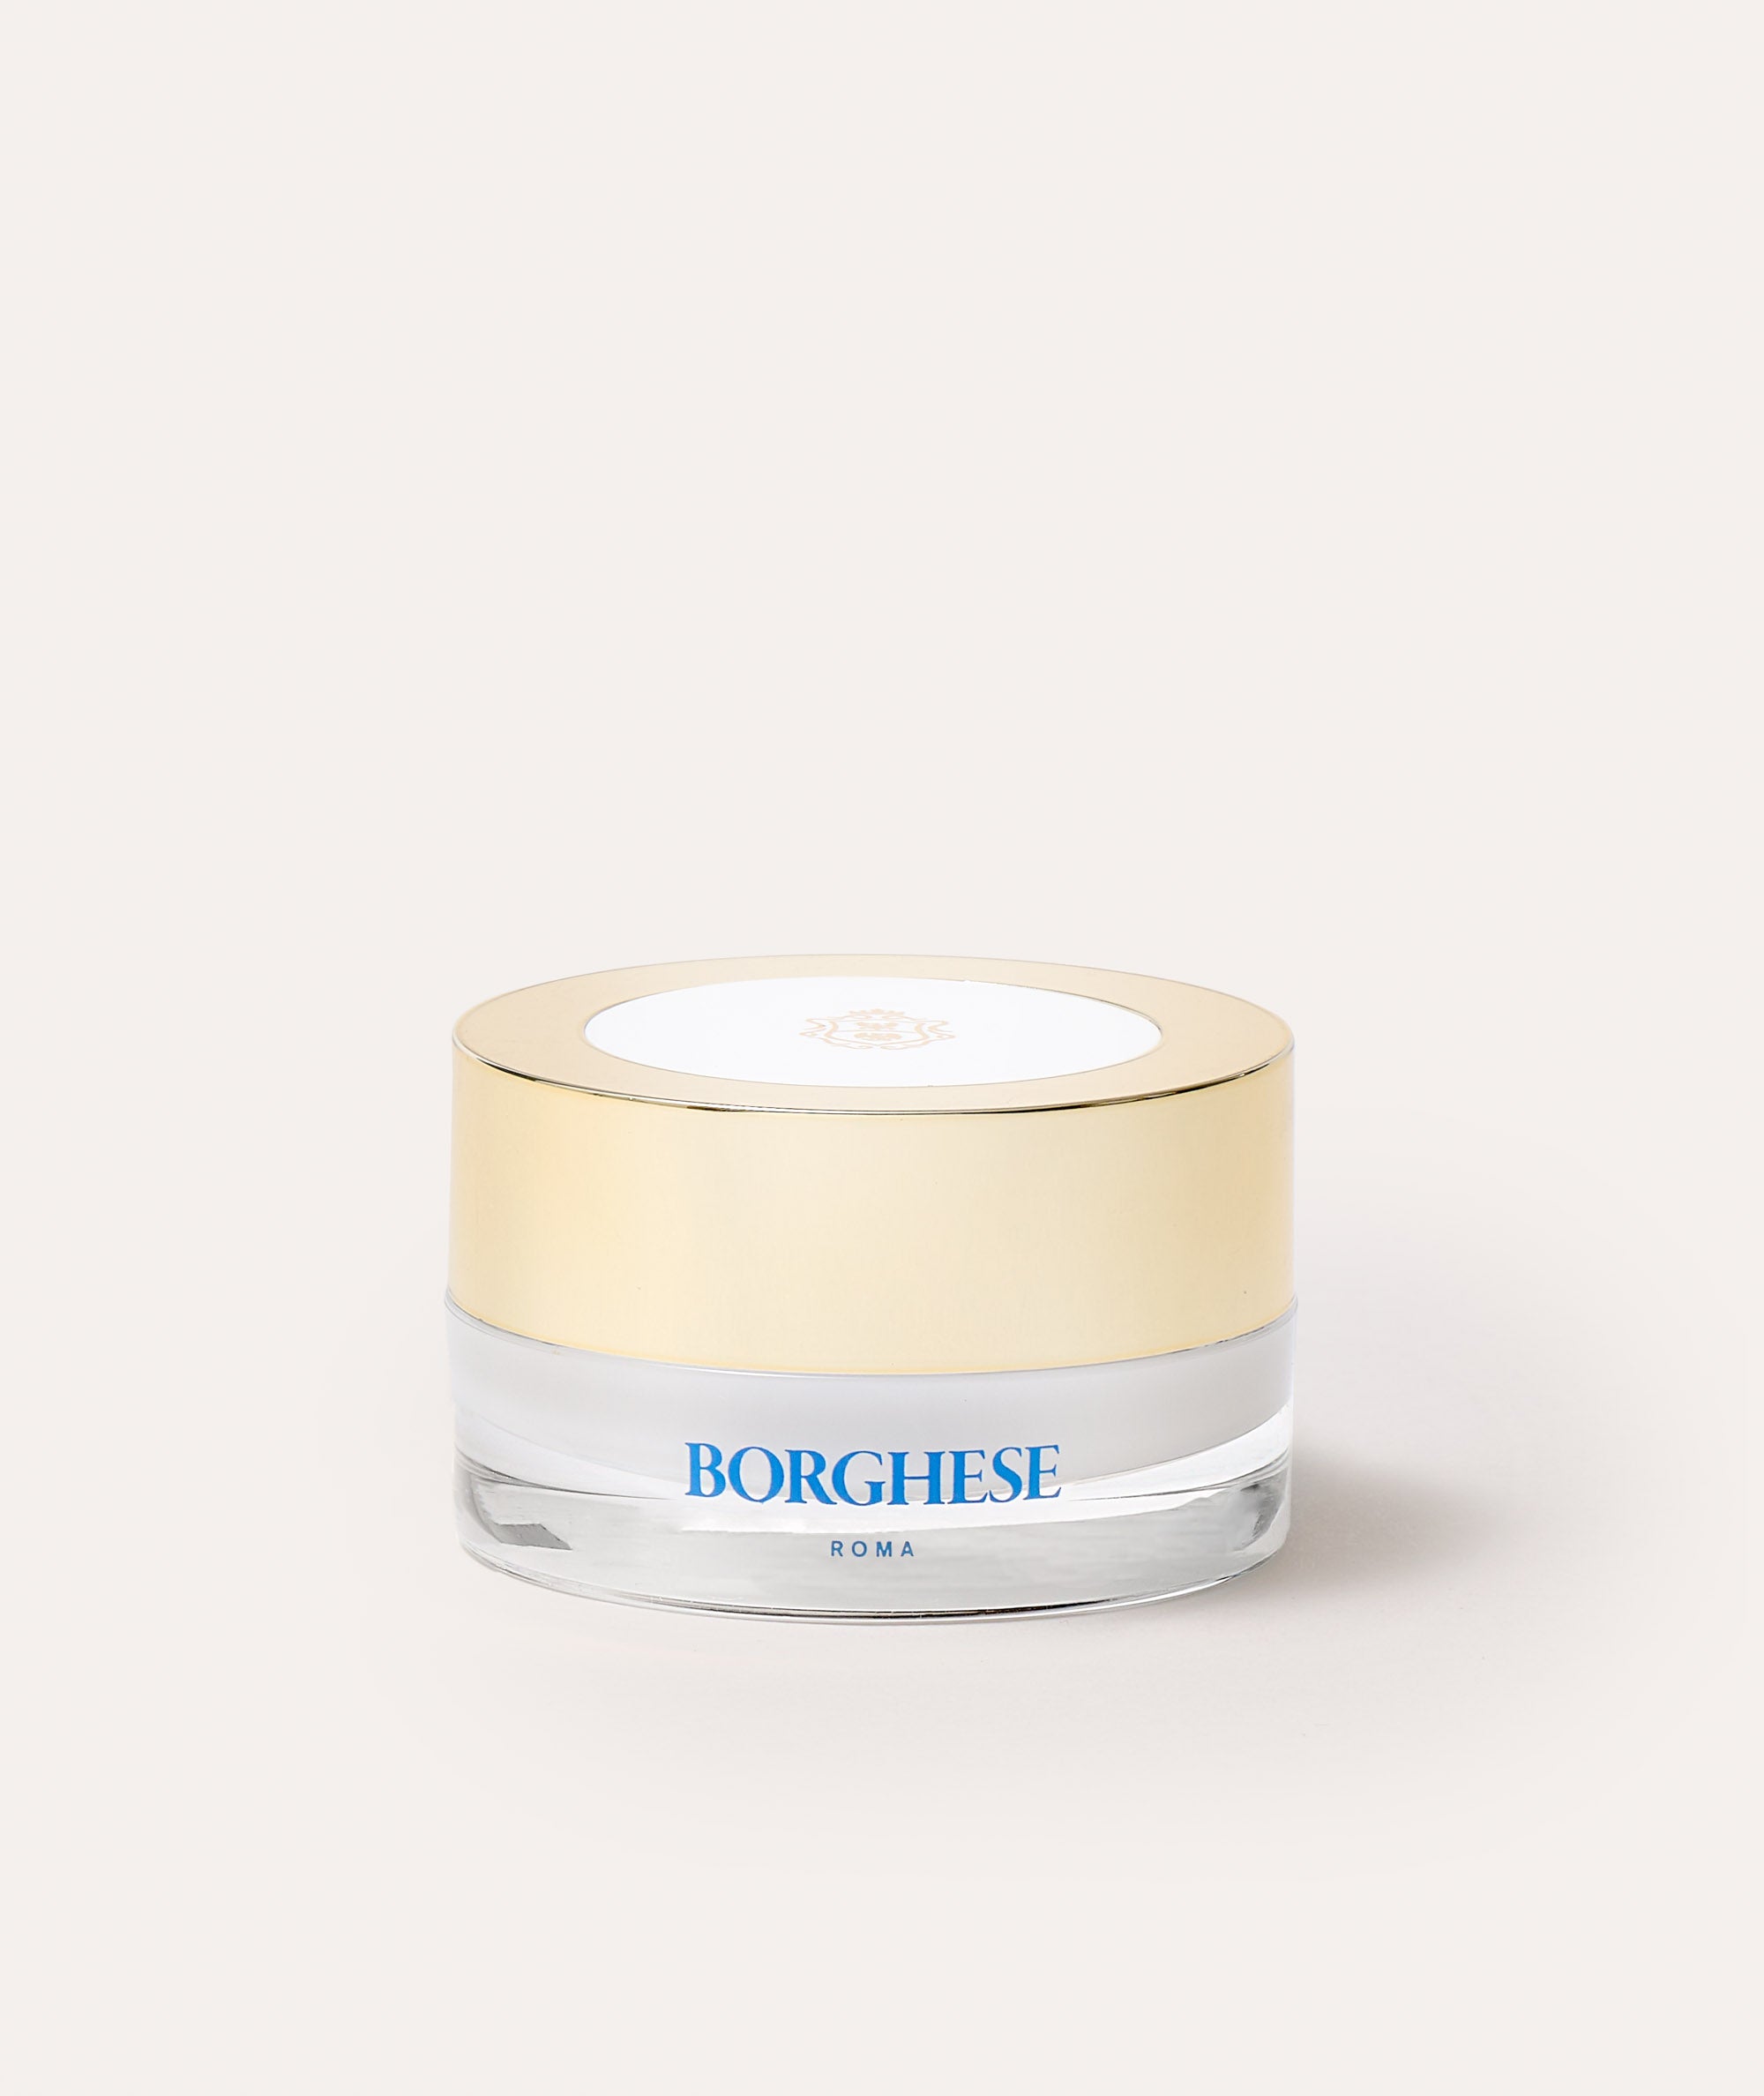 This is a picture of the Borghese Occhi Ristorativo Eye Creme in a glass jar